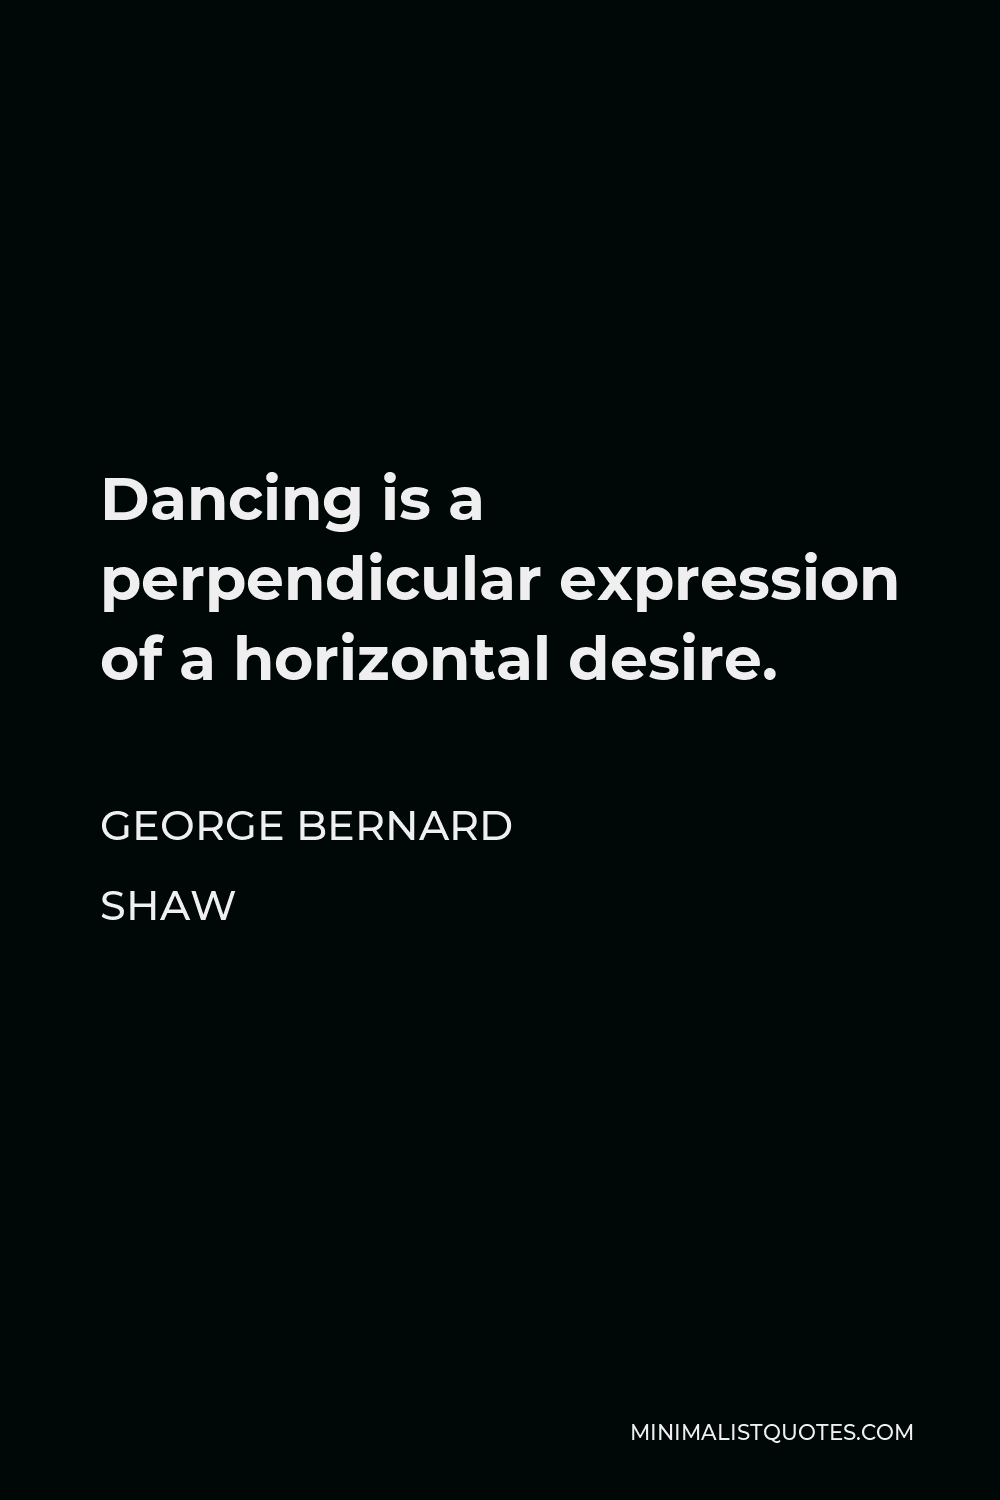 George Bernard Shaw Quote - Dancing is a perpendicular expression of a horizontal desire.